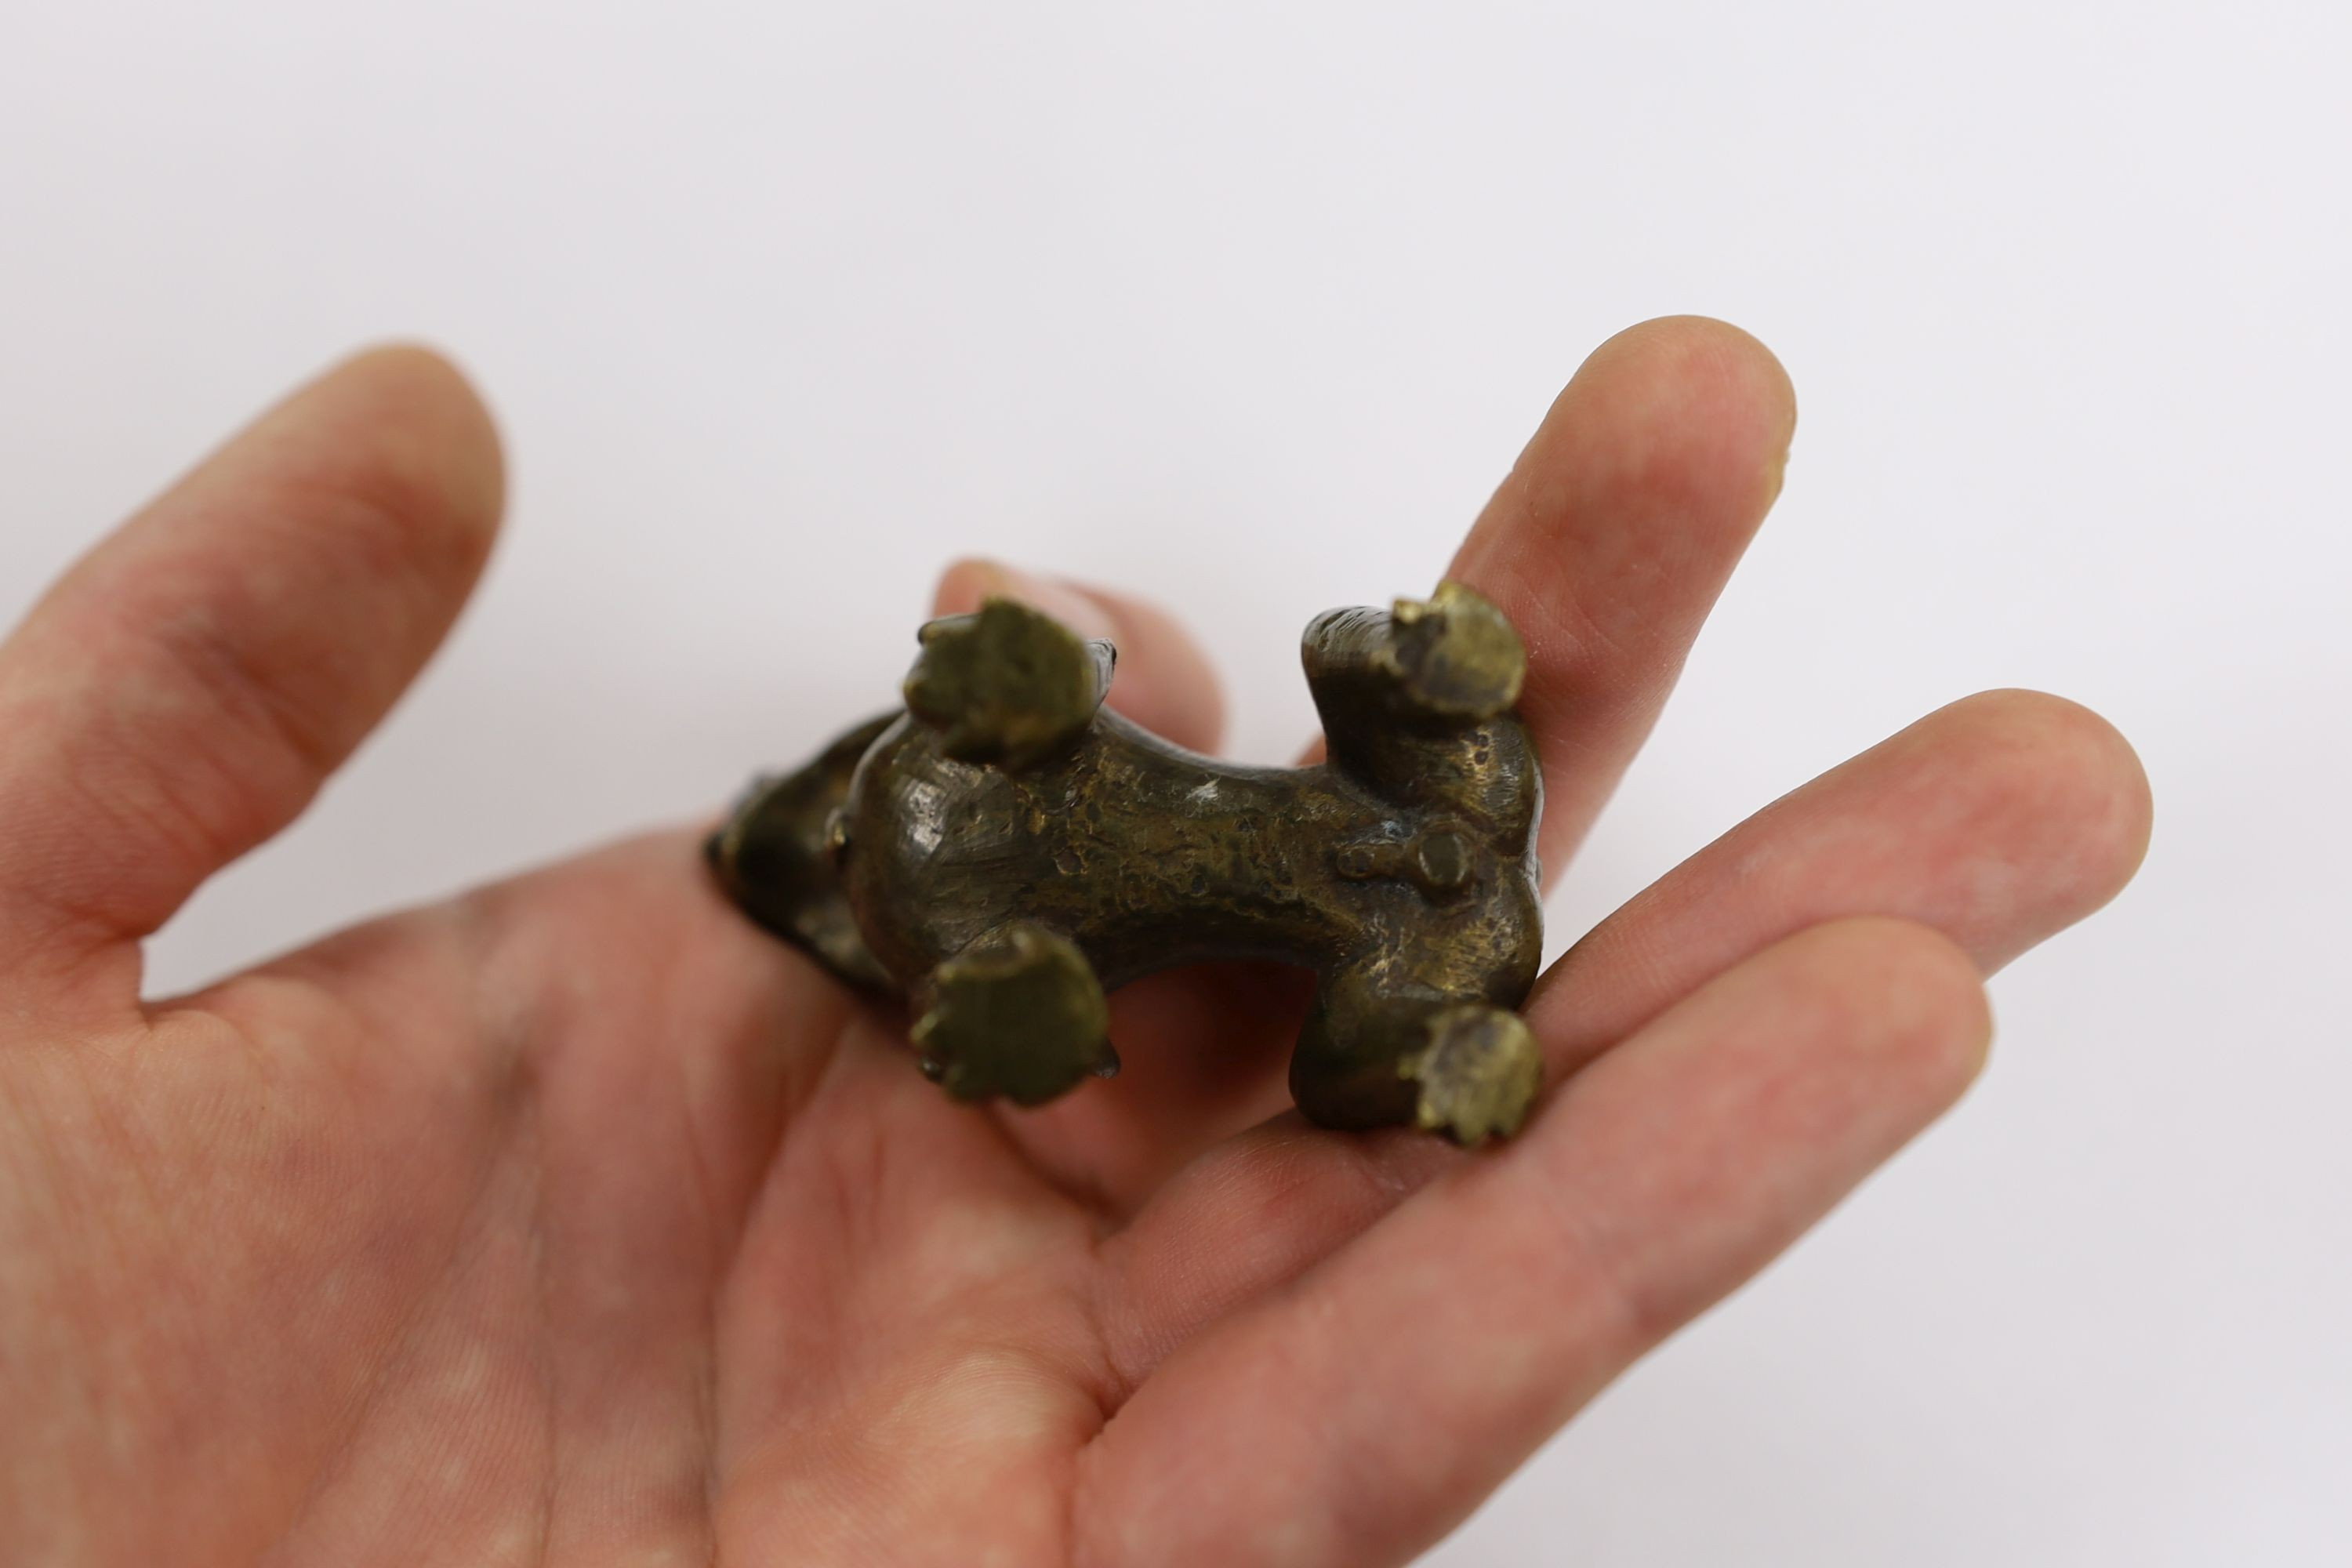 Five Chinese or Tibetan bronze figures or Buddhist implements, tallest 13cms high